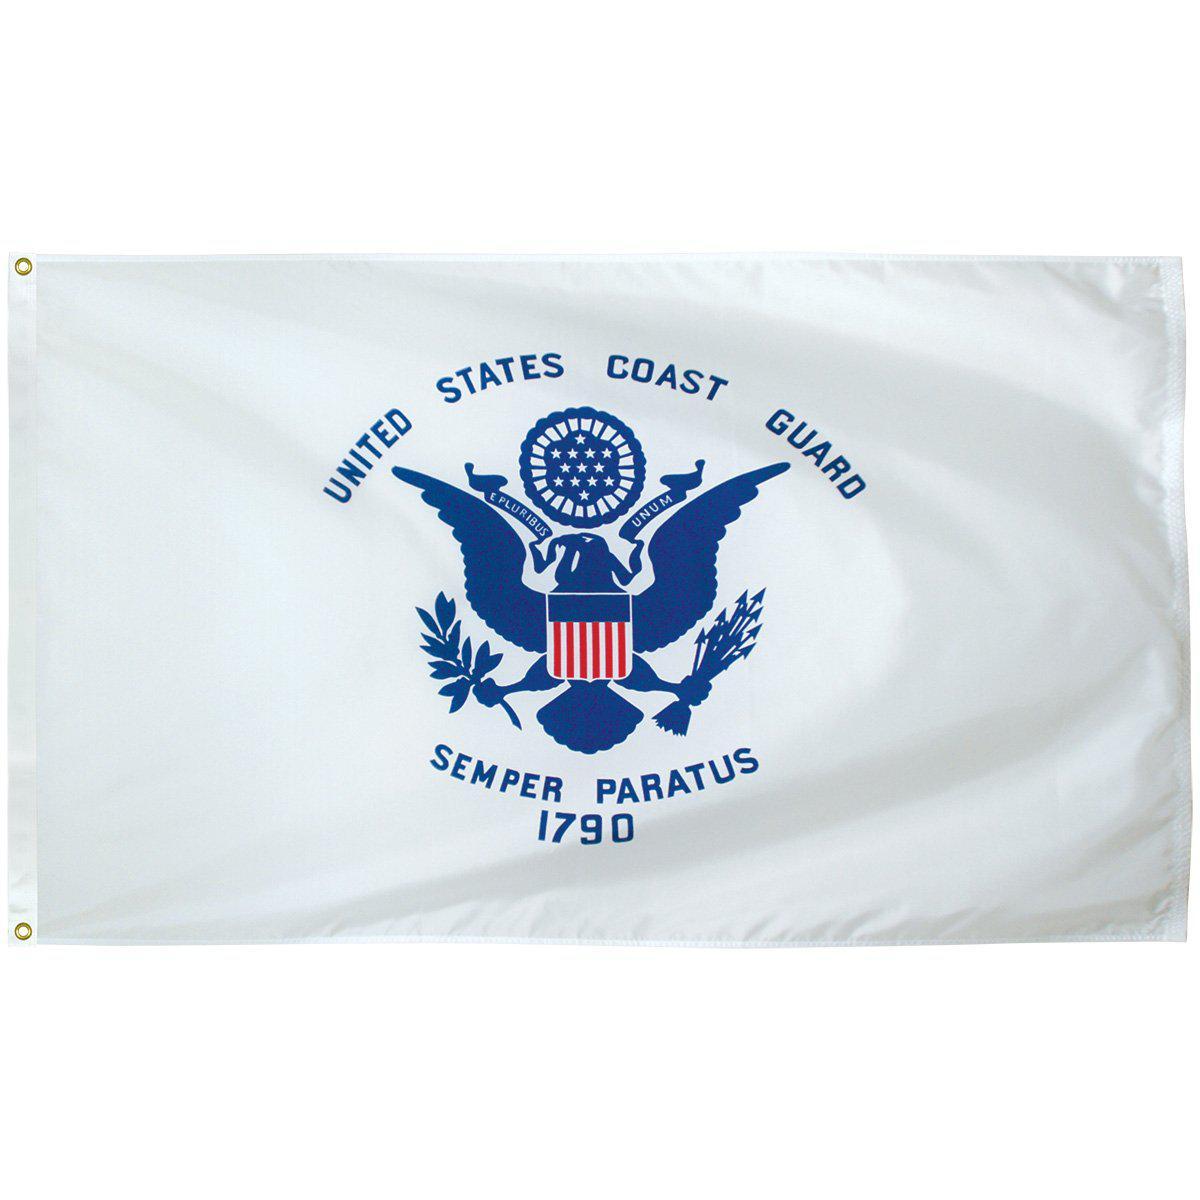 U.S. Coast Guard nylon flags are available in various sizes